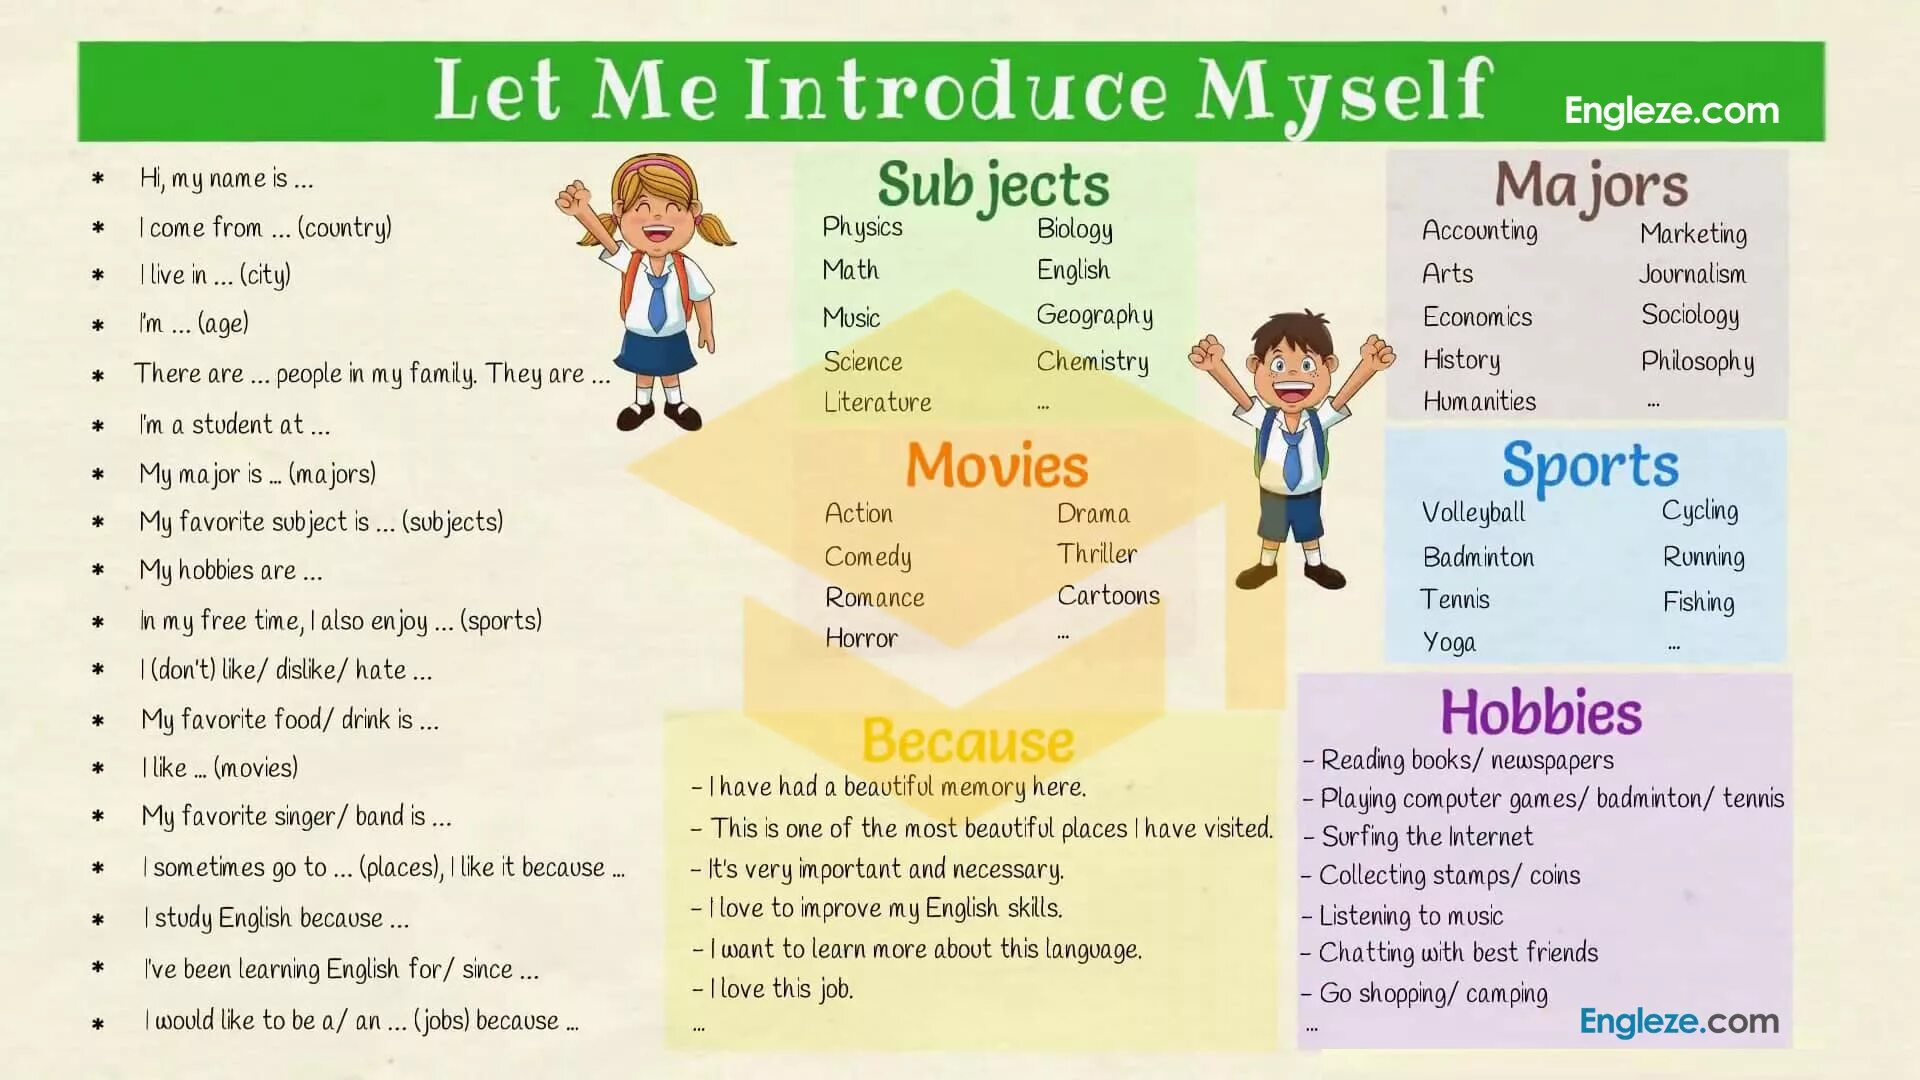 First topic. Урок английского языка. How to introduce yourself in English. Английский introduce yourself. About myself английском языке.